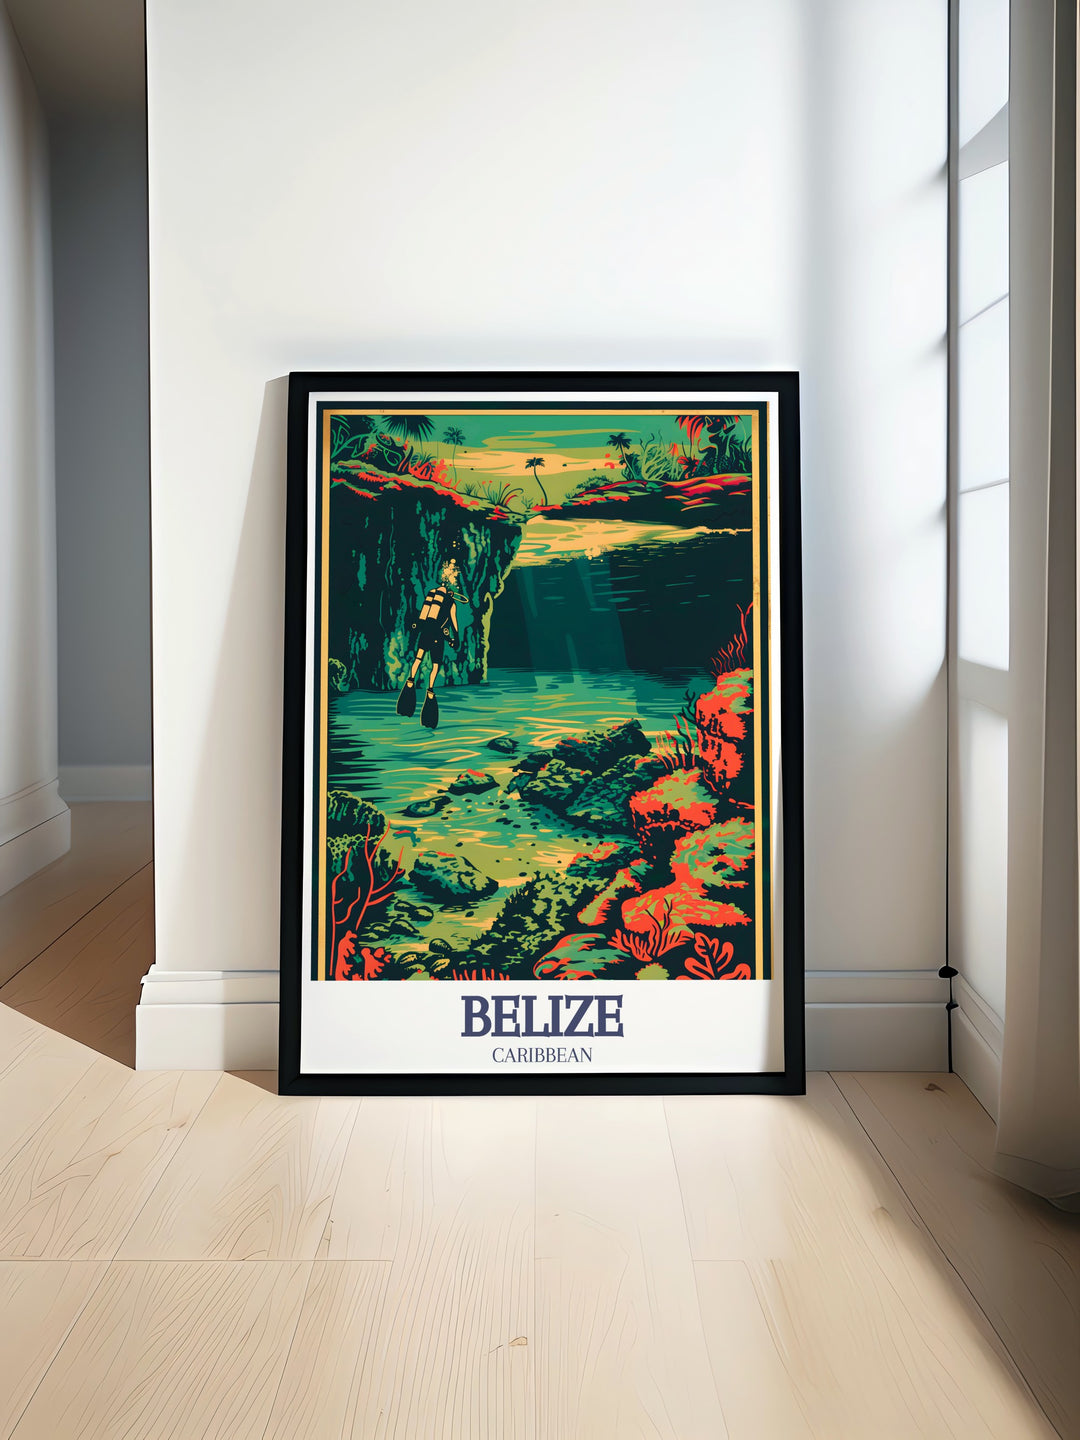 Blue Hole Belize Barrier Reef travel poster featuring vibrant blue waters and stunning marine life perfect for Caribbean decor and gifts bringing tropical charm to any space with high quality prints and fade resistant inks